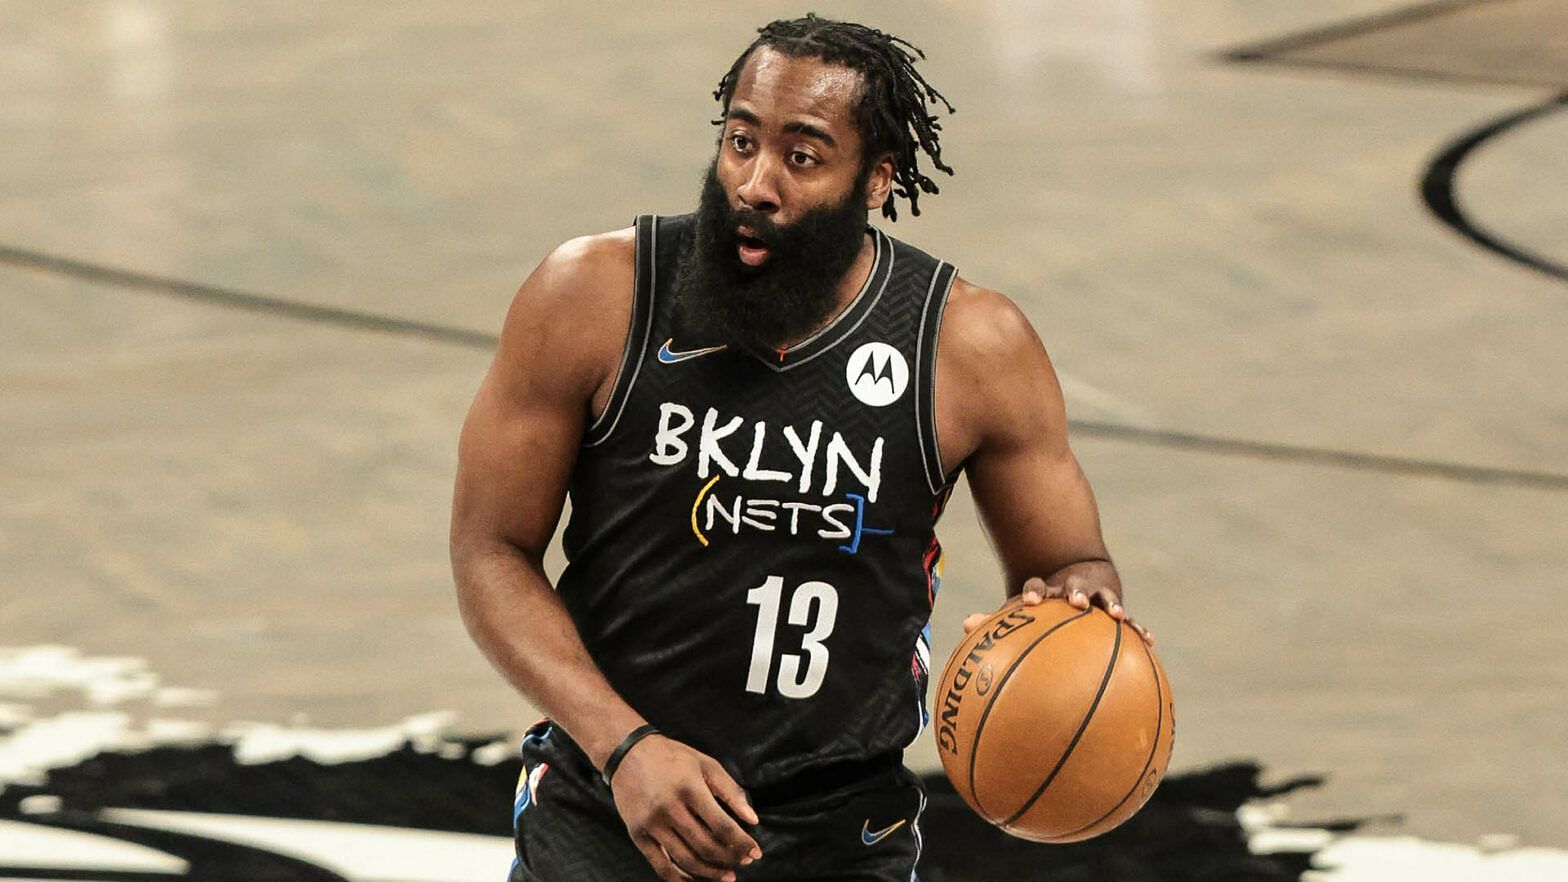 The Brooklyn Nets need James Harden&rsquo;s All-Star self to compete against top-tier teams.[Photo: NBA.com]